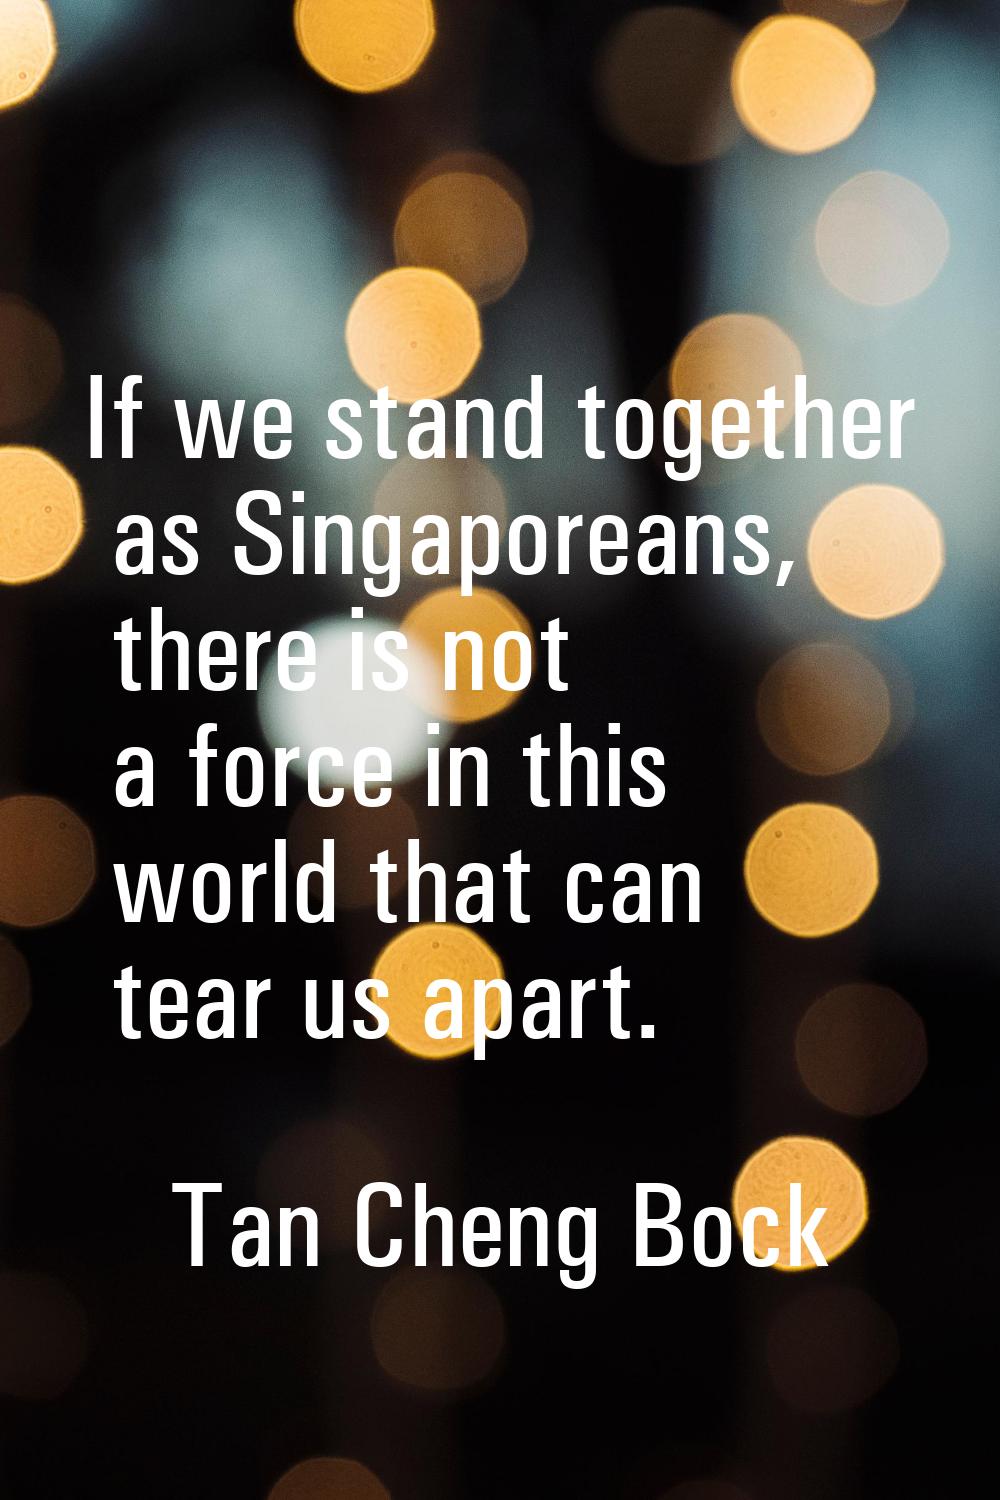 If we stand together as Singaporeans, there is not a force in this world that can tear us apart.